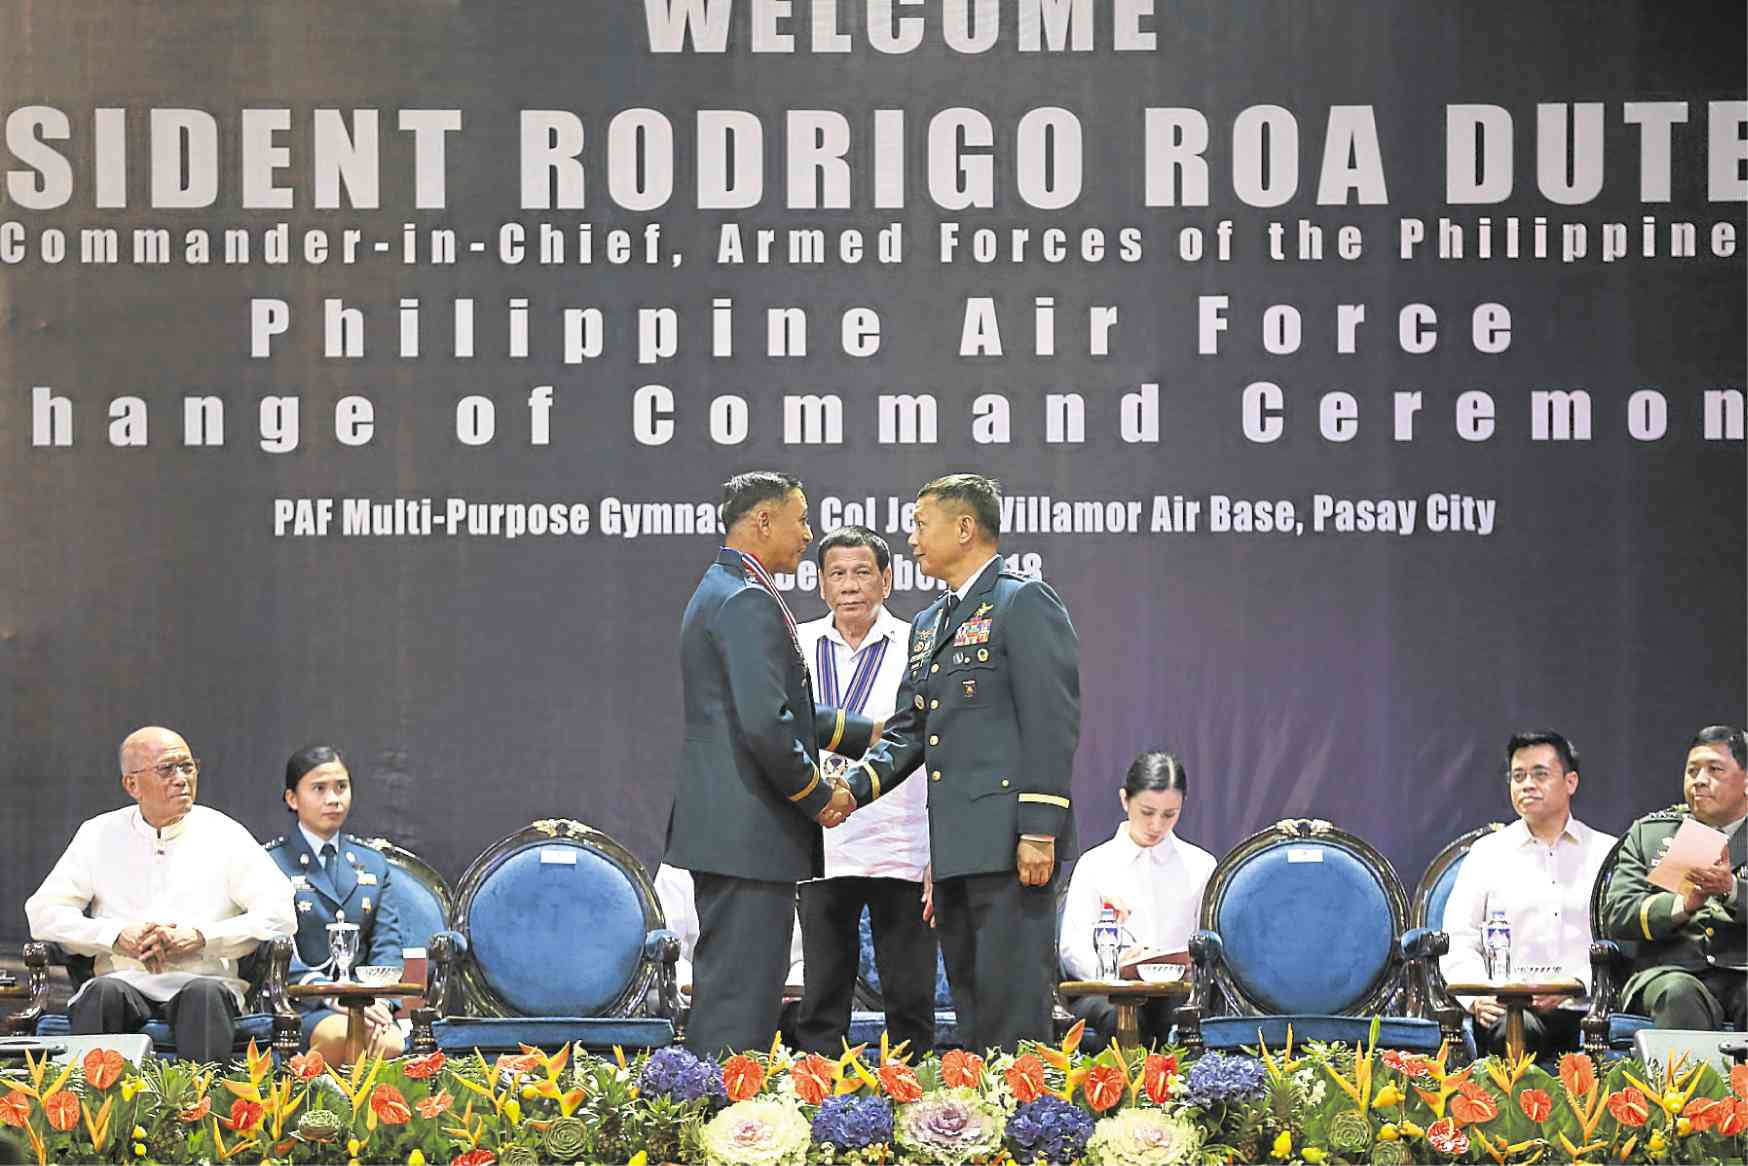 CHANGE OF COMMAND President Duterte witnesses the turnover of leadership of the Philippine Air Force from outgoing Lt. Gen. Galileo Gerard Kintanar (left) to Lt. Gen. Rozzano Briguez during a program at Villamor Air Base in Pasay City on Friday. —JOAN BONDOC